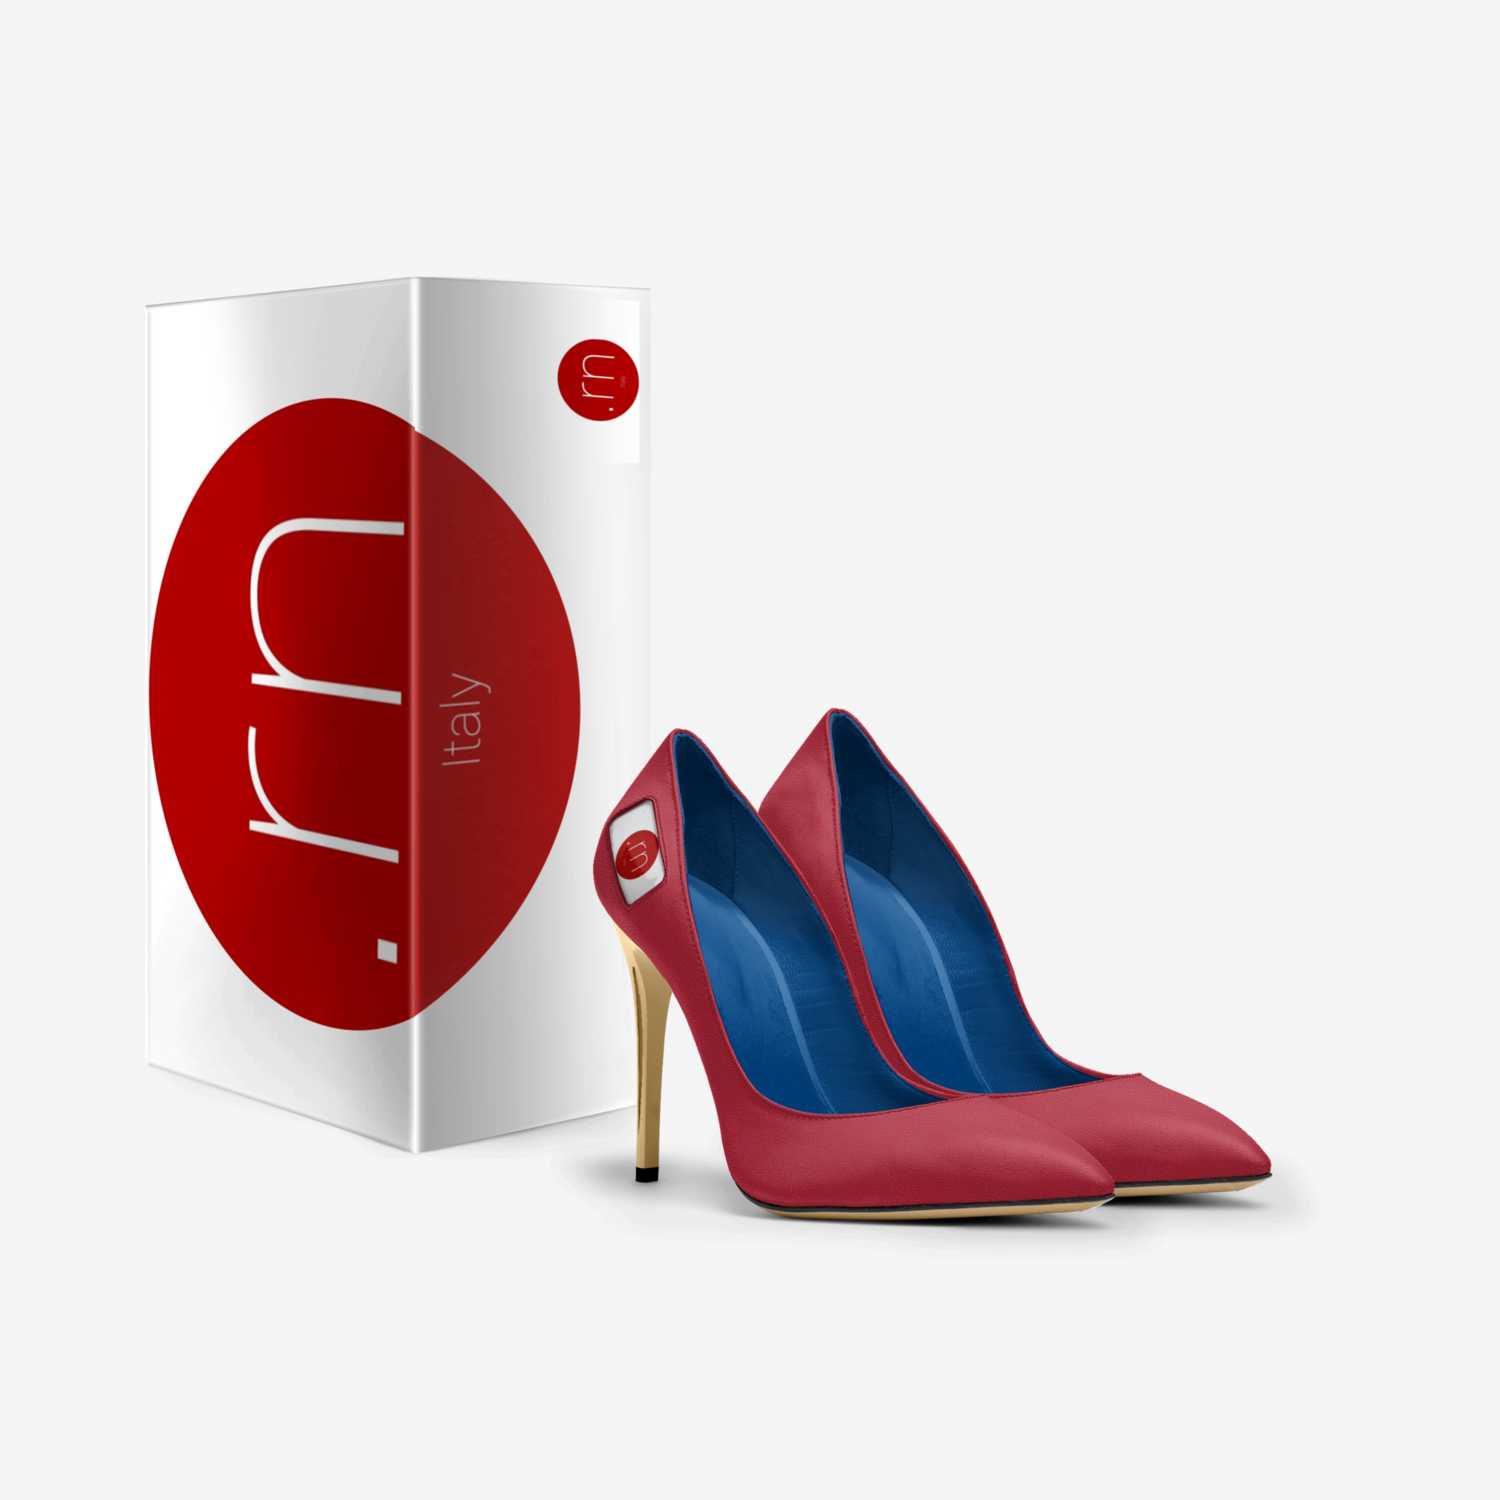 Reddot.rn heels custom made in Italy shoes by James Etheridge | Box view